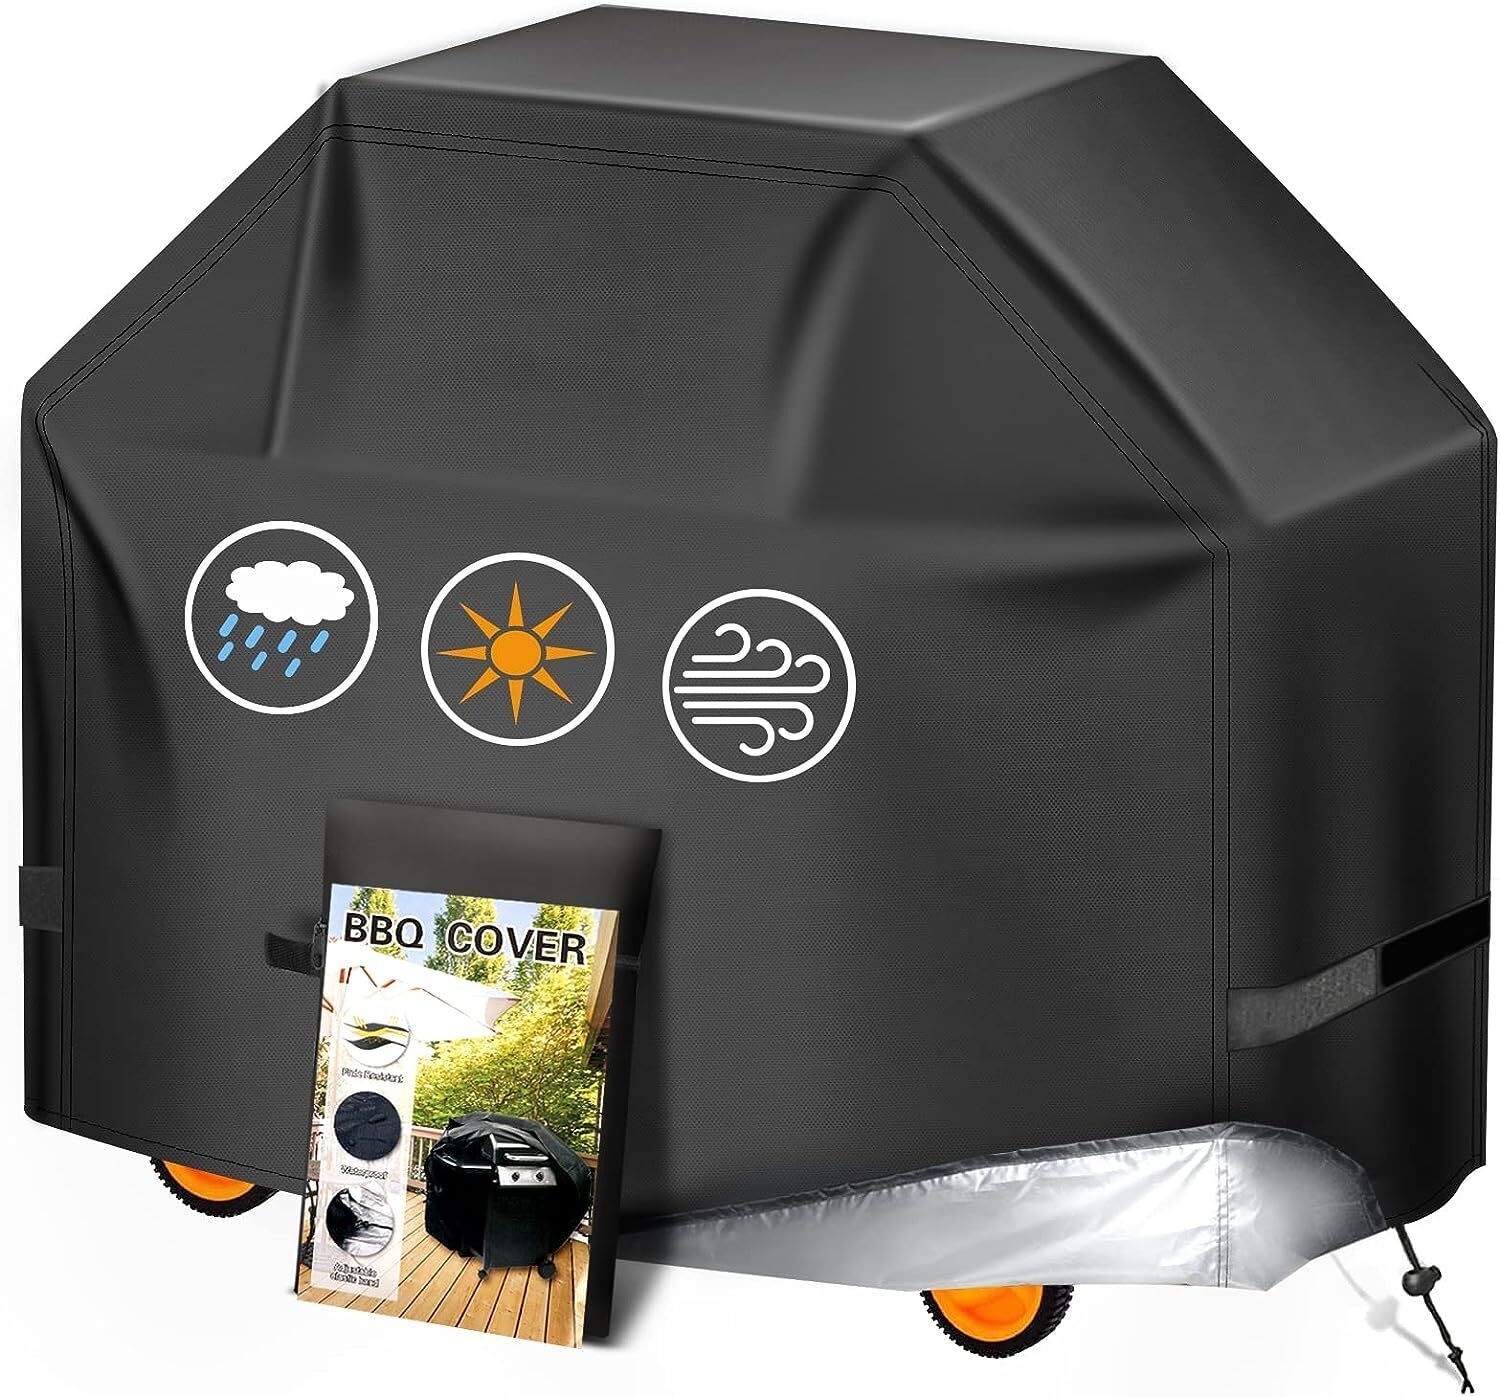 Primary image for 58-inch BBQ Grill Cover for Char Broil 3-4 Burner & Dyna-Glo 4 Burner Gas Grills